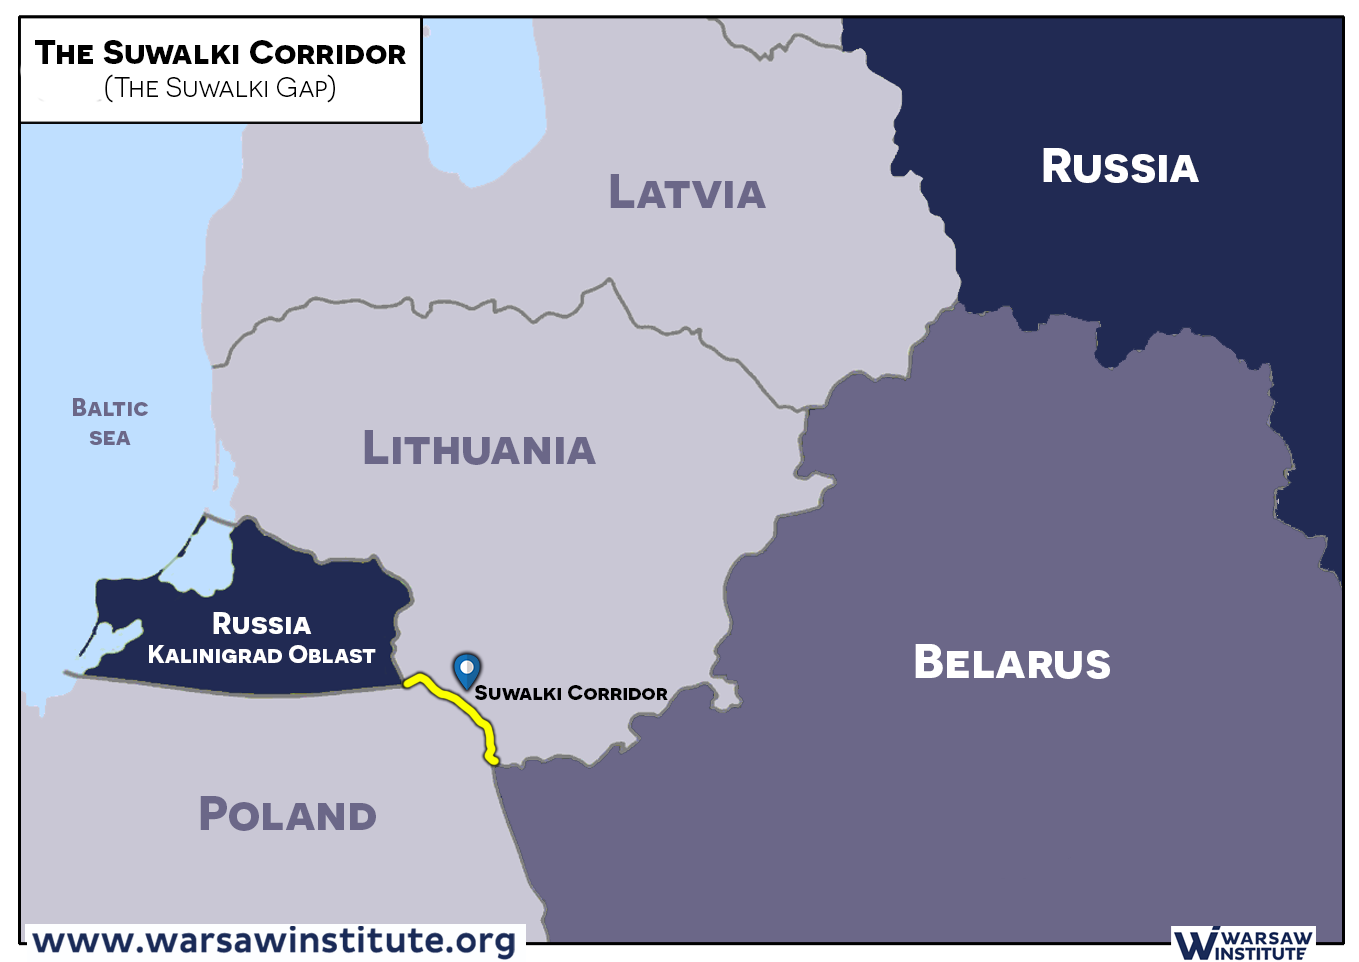 https://warsawinstitute.org/wp-content/uploads/2019/02/SUWALKI-GAP-CORRIDOR-US-PERMANENT-MILITARY-BASE-IN-POLAND-WARSAW-INSTITUTE-SPECIAL-REPORT.png